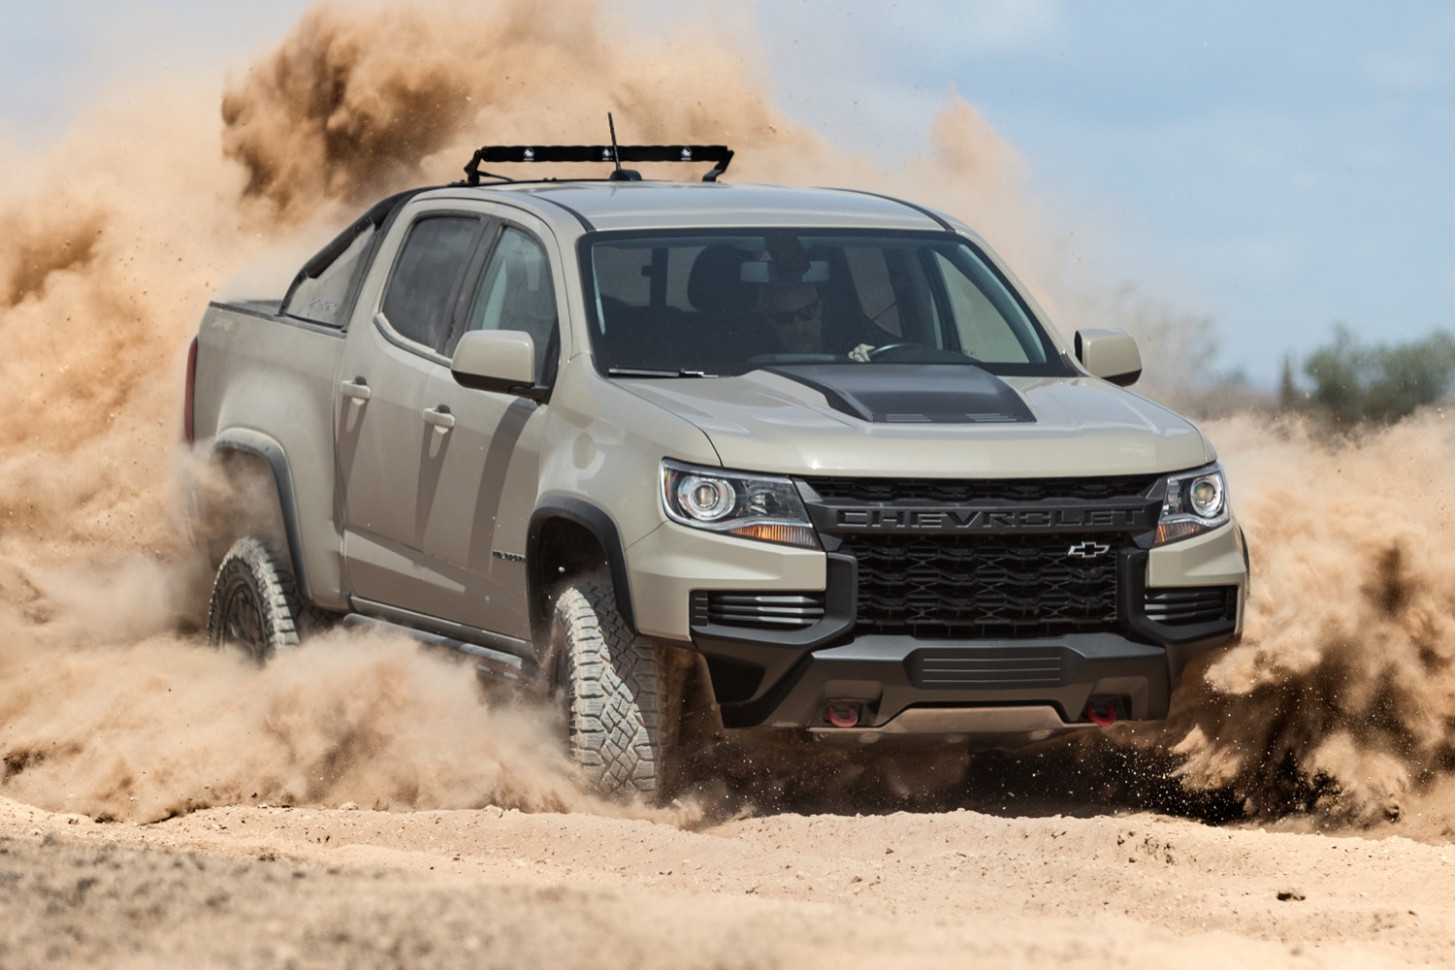 Rumors 2022 Chevy Colorado Going Launched Soon